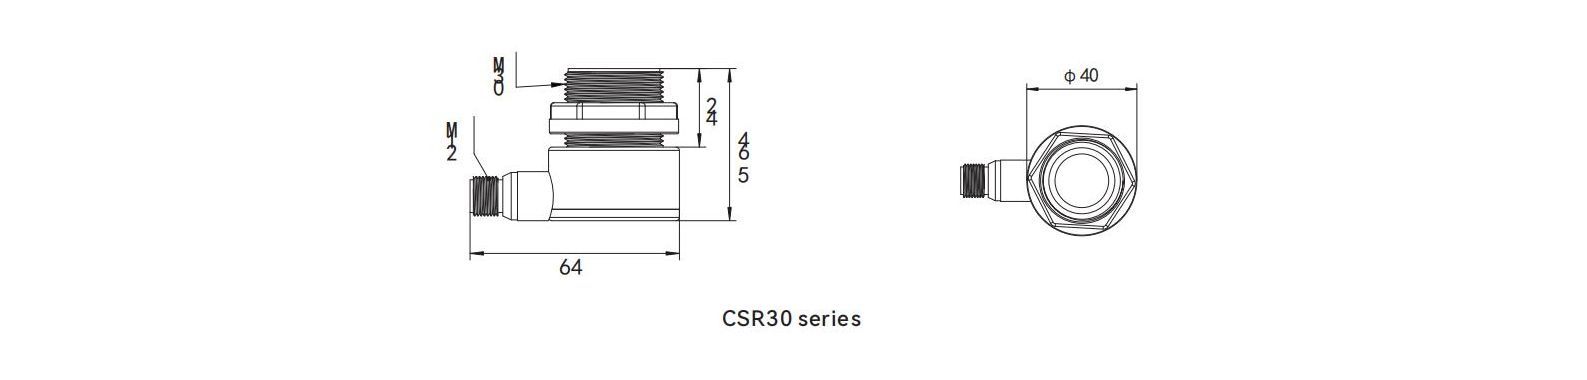 Dimensions of ultrasonic level controller CSR30 series